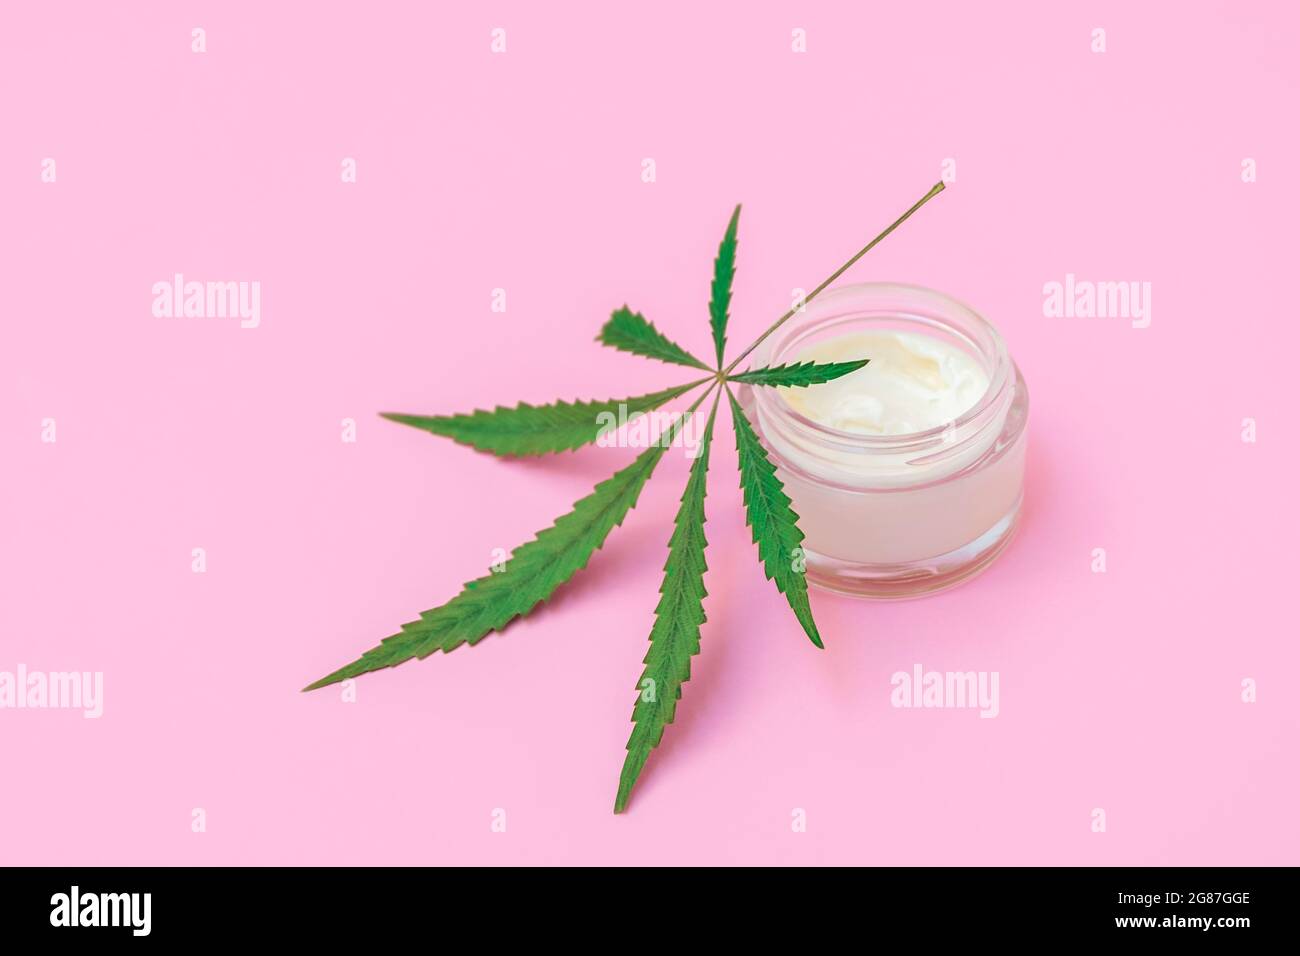 Cannabis-infused cosmetics concept. Bottle of cream with hemp leaf on soft pink background with copy space Stock Photo